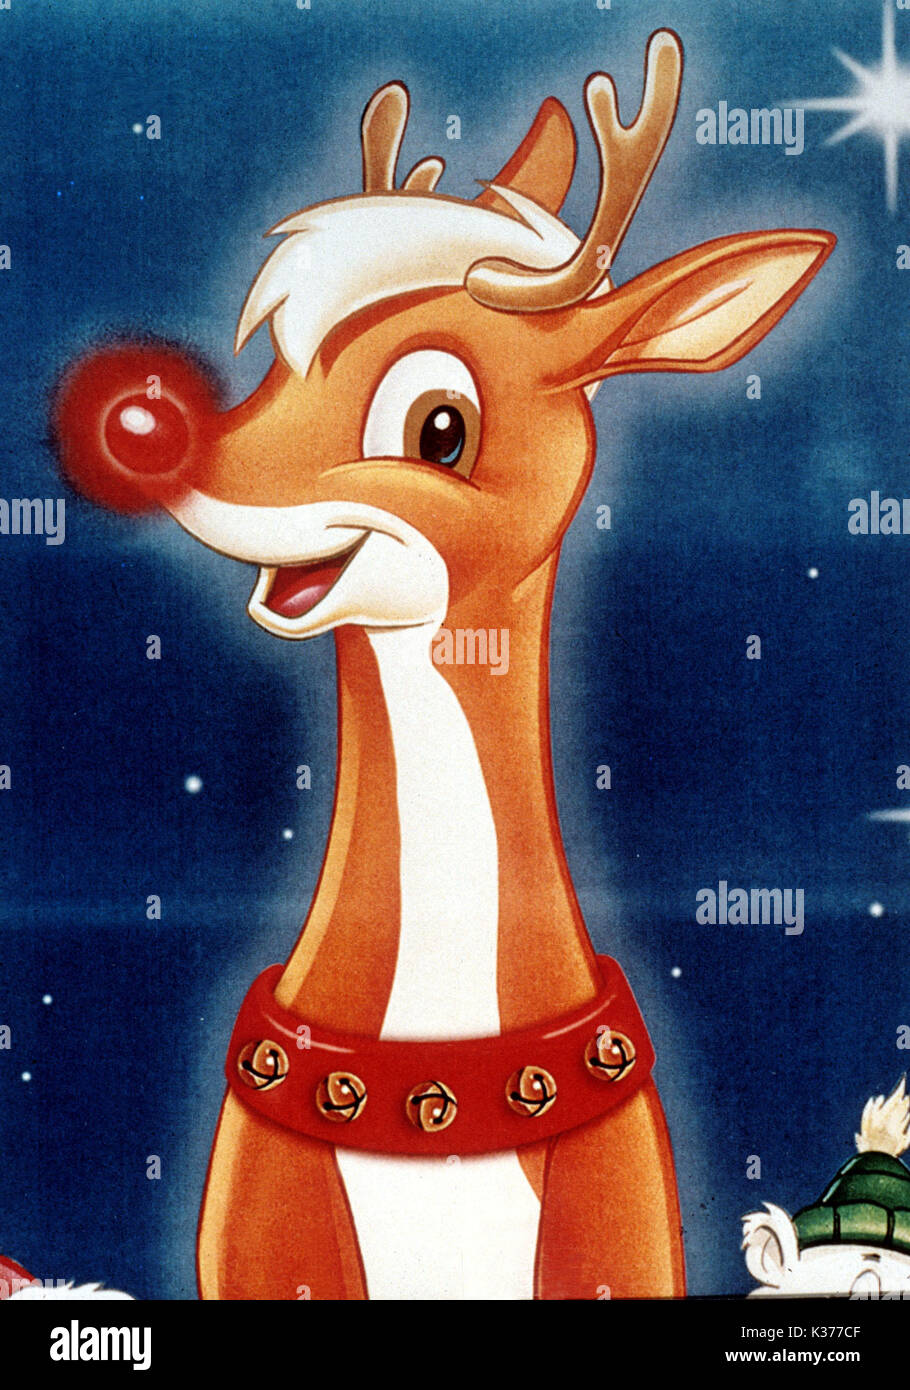 RUDOLPH THE RED NOSED REINDEER A GOODTIMES ENTERTAIMENT RUDOLPH THE RED NOSED REINDEER     Date: 1998 Stock Photo